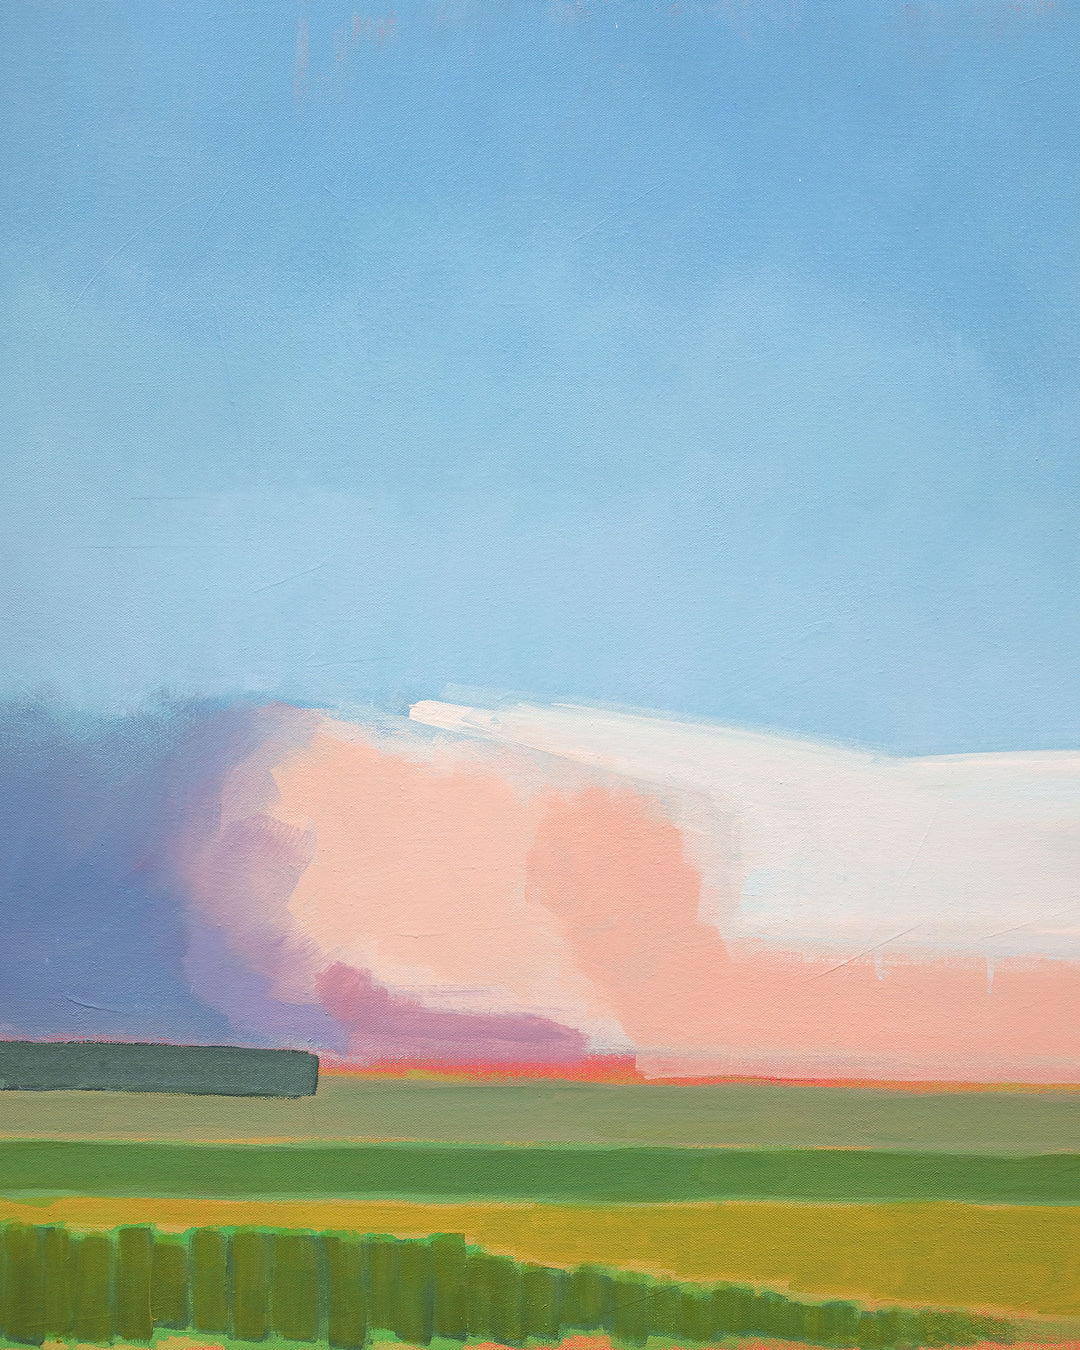 Abstract painting of a green field with pink, purple, and blue clouds in the sky.